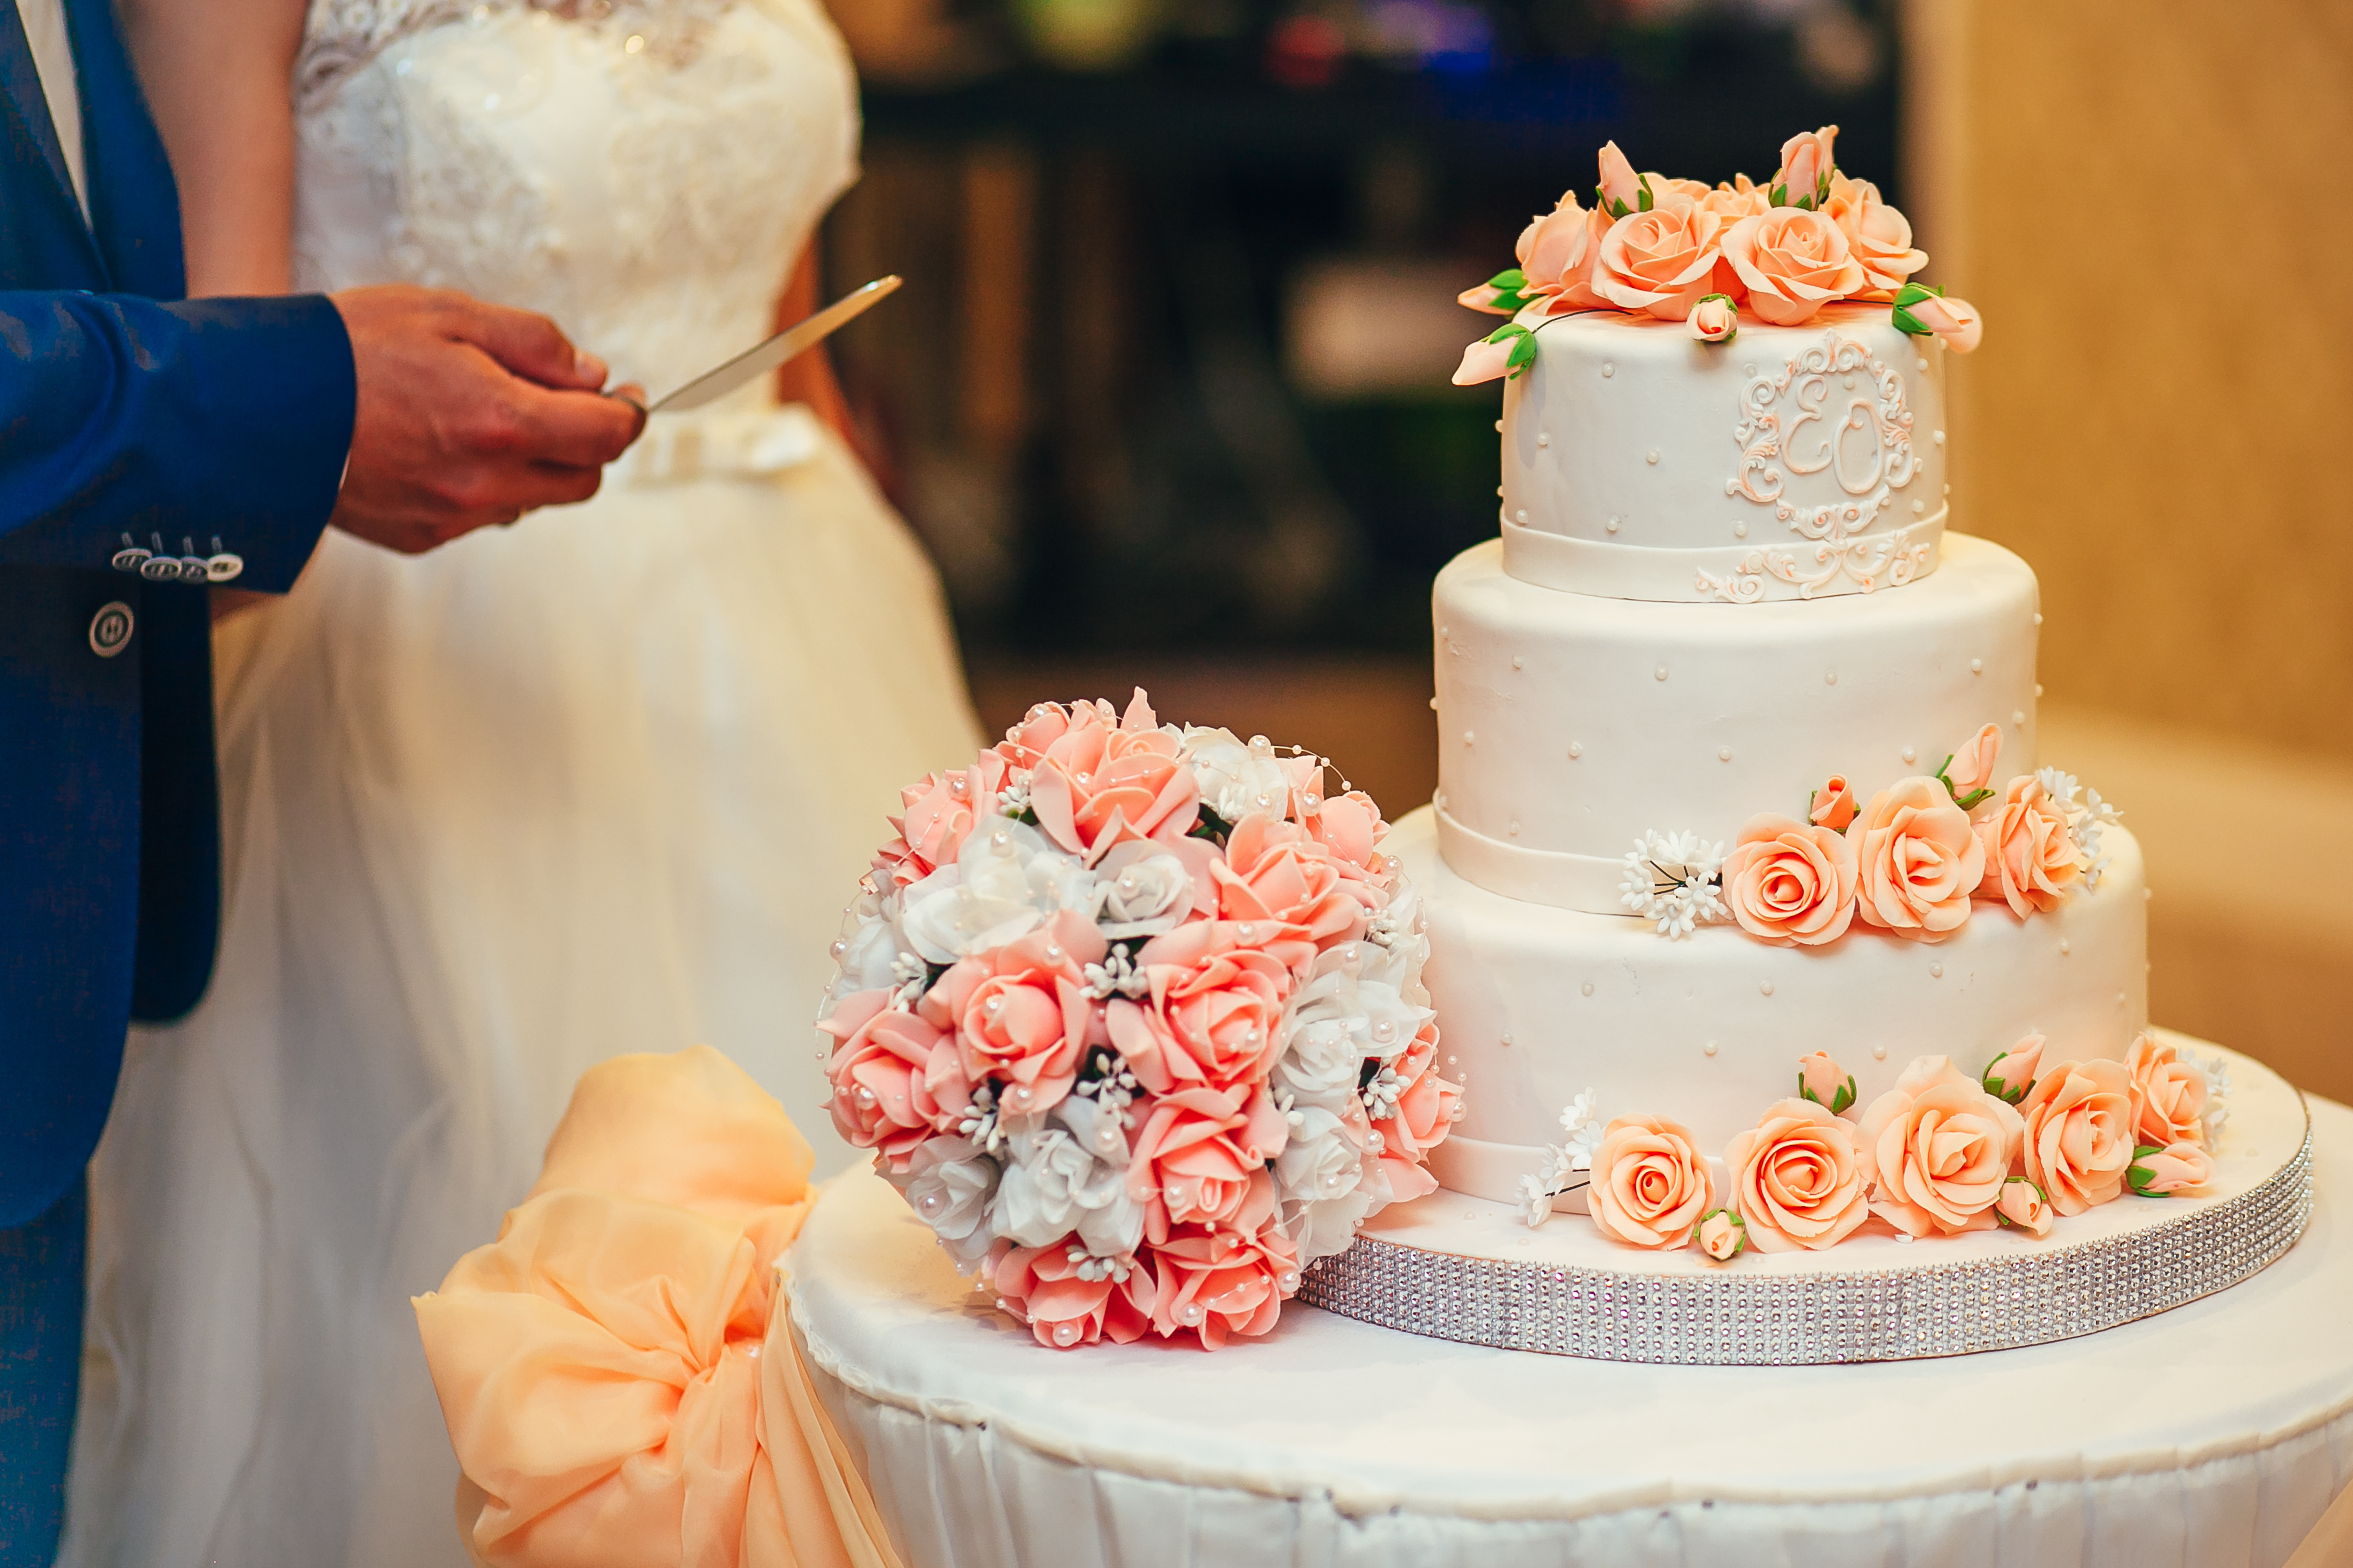 A bride and groom about to cut their wedding cake | Source: Shutterstock